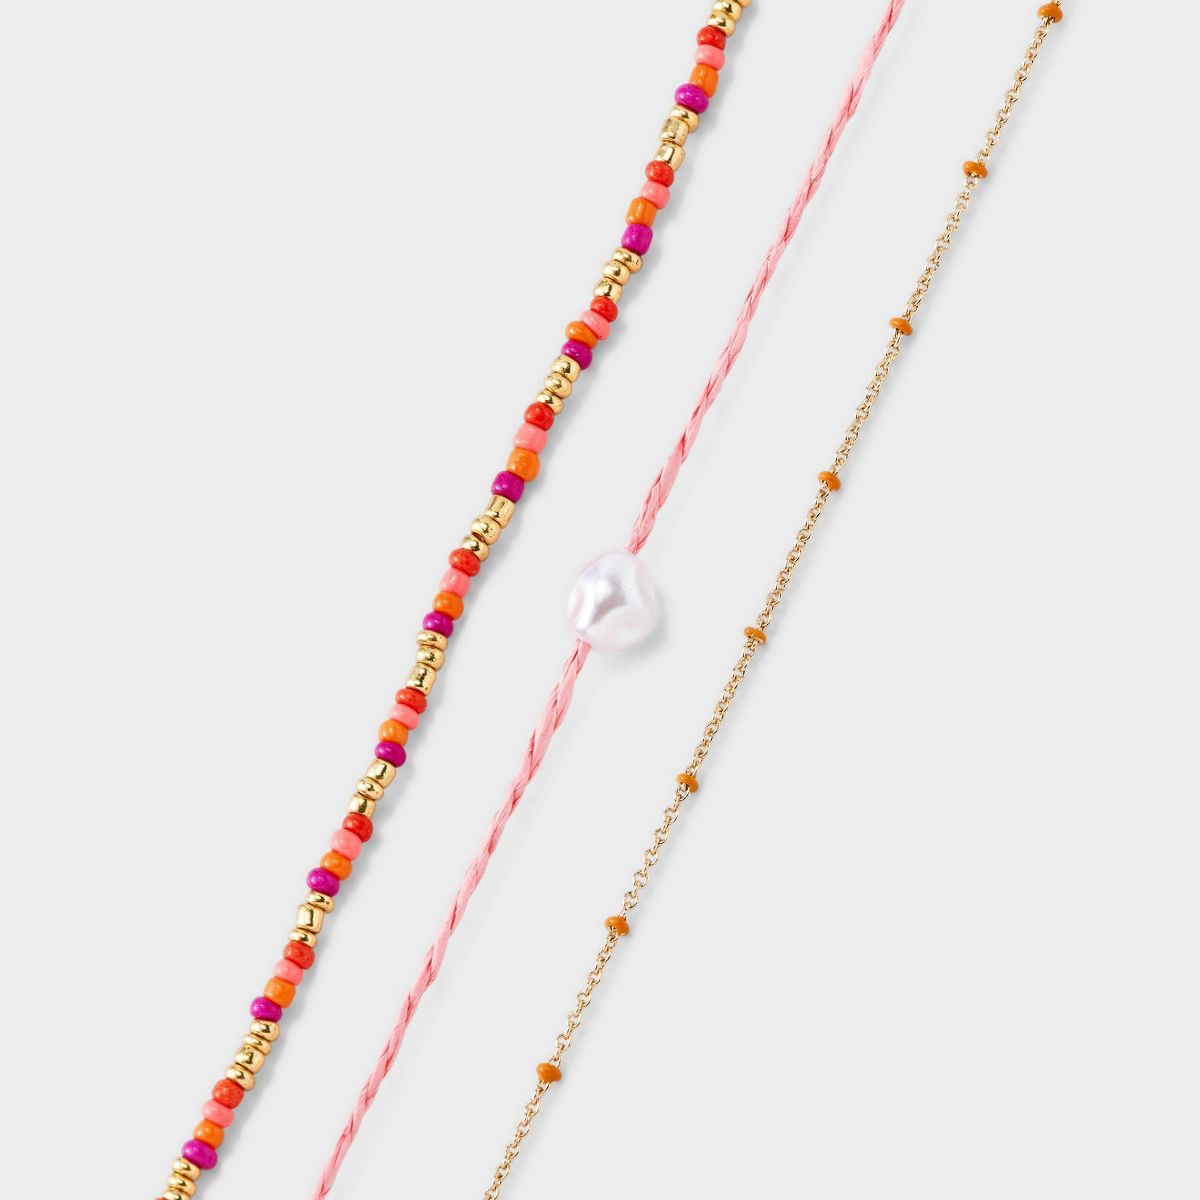 Glass Beads and Cord Anklet Set 3pc - A New Day™ Pink/Gold | Target